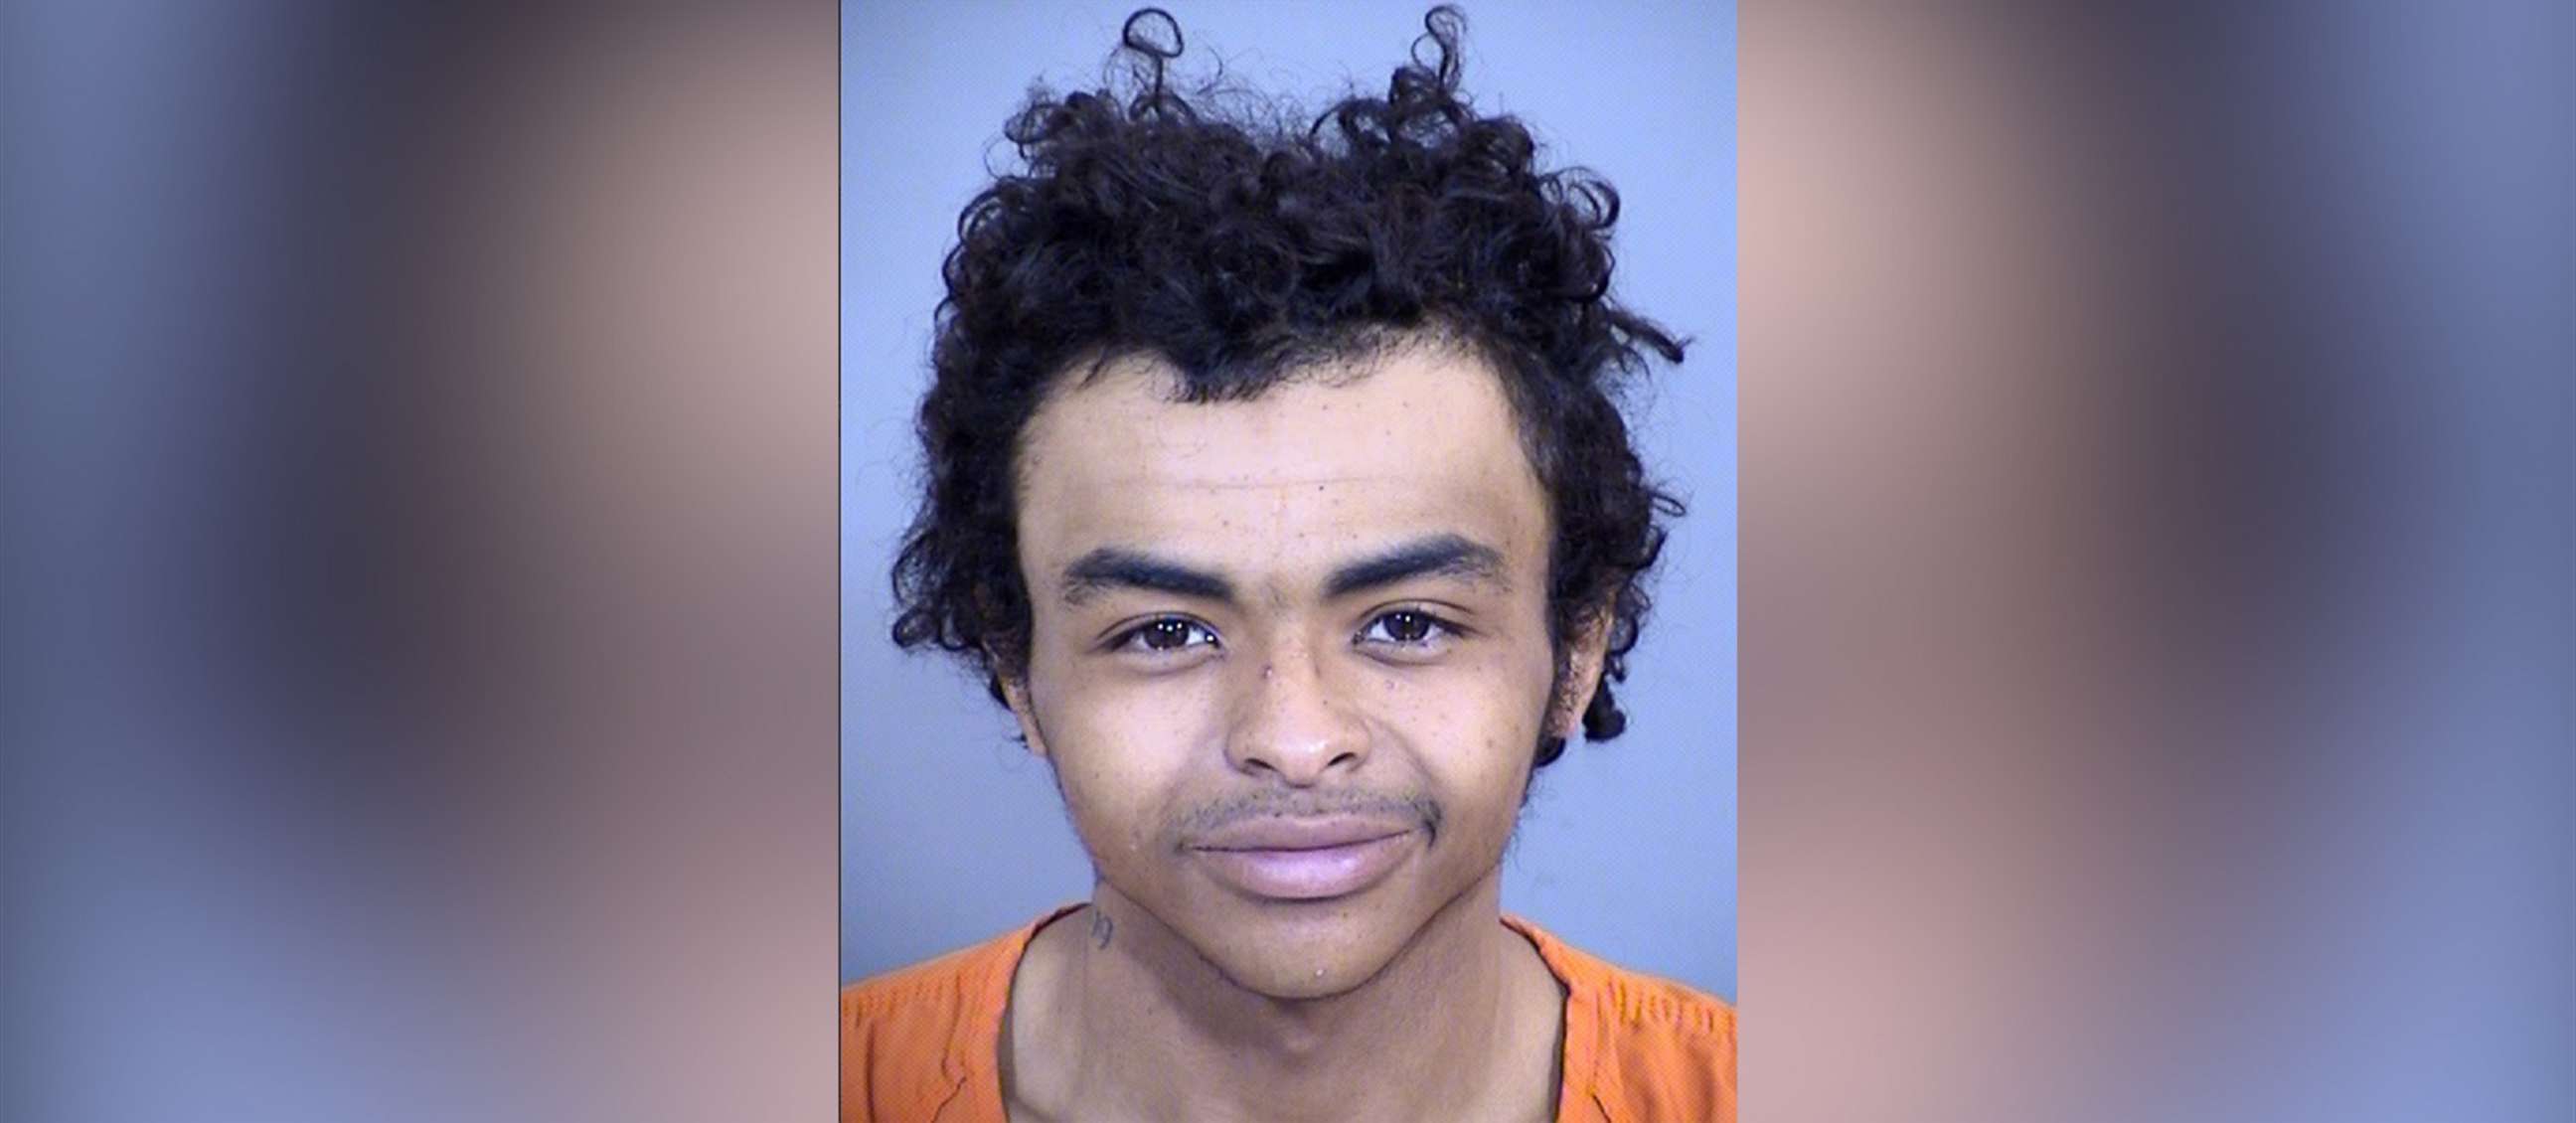 PHOTO: Ashin Tricarico has been booked in Maricopa County and charged for shooting spree that left 1 person dead and a dozen others injured – mostly from non-gunshot wounds in West Valley, Ariz., June 18, 2021. 